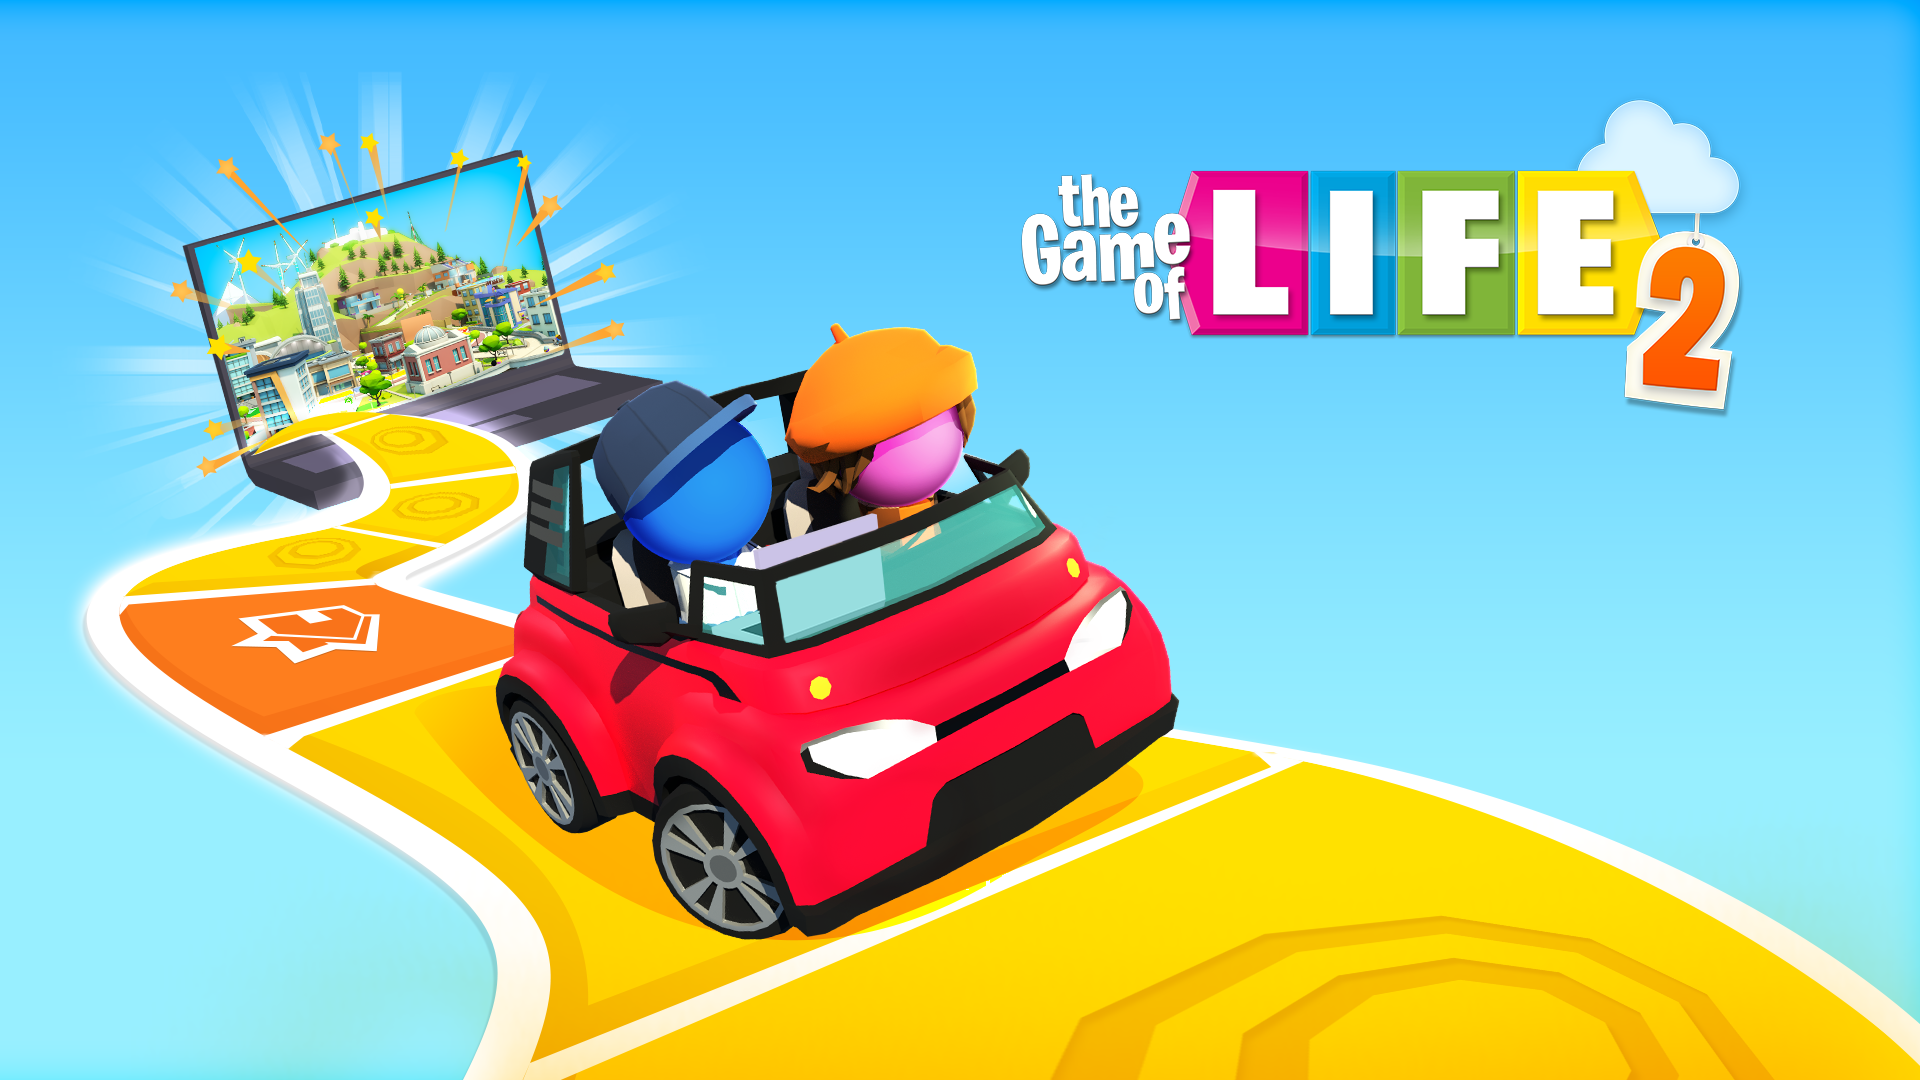 The Game of Life by Marmalade Game Studio